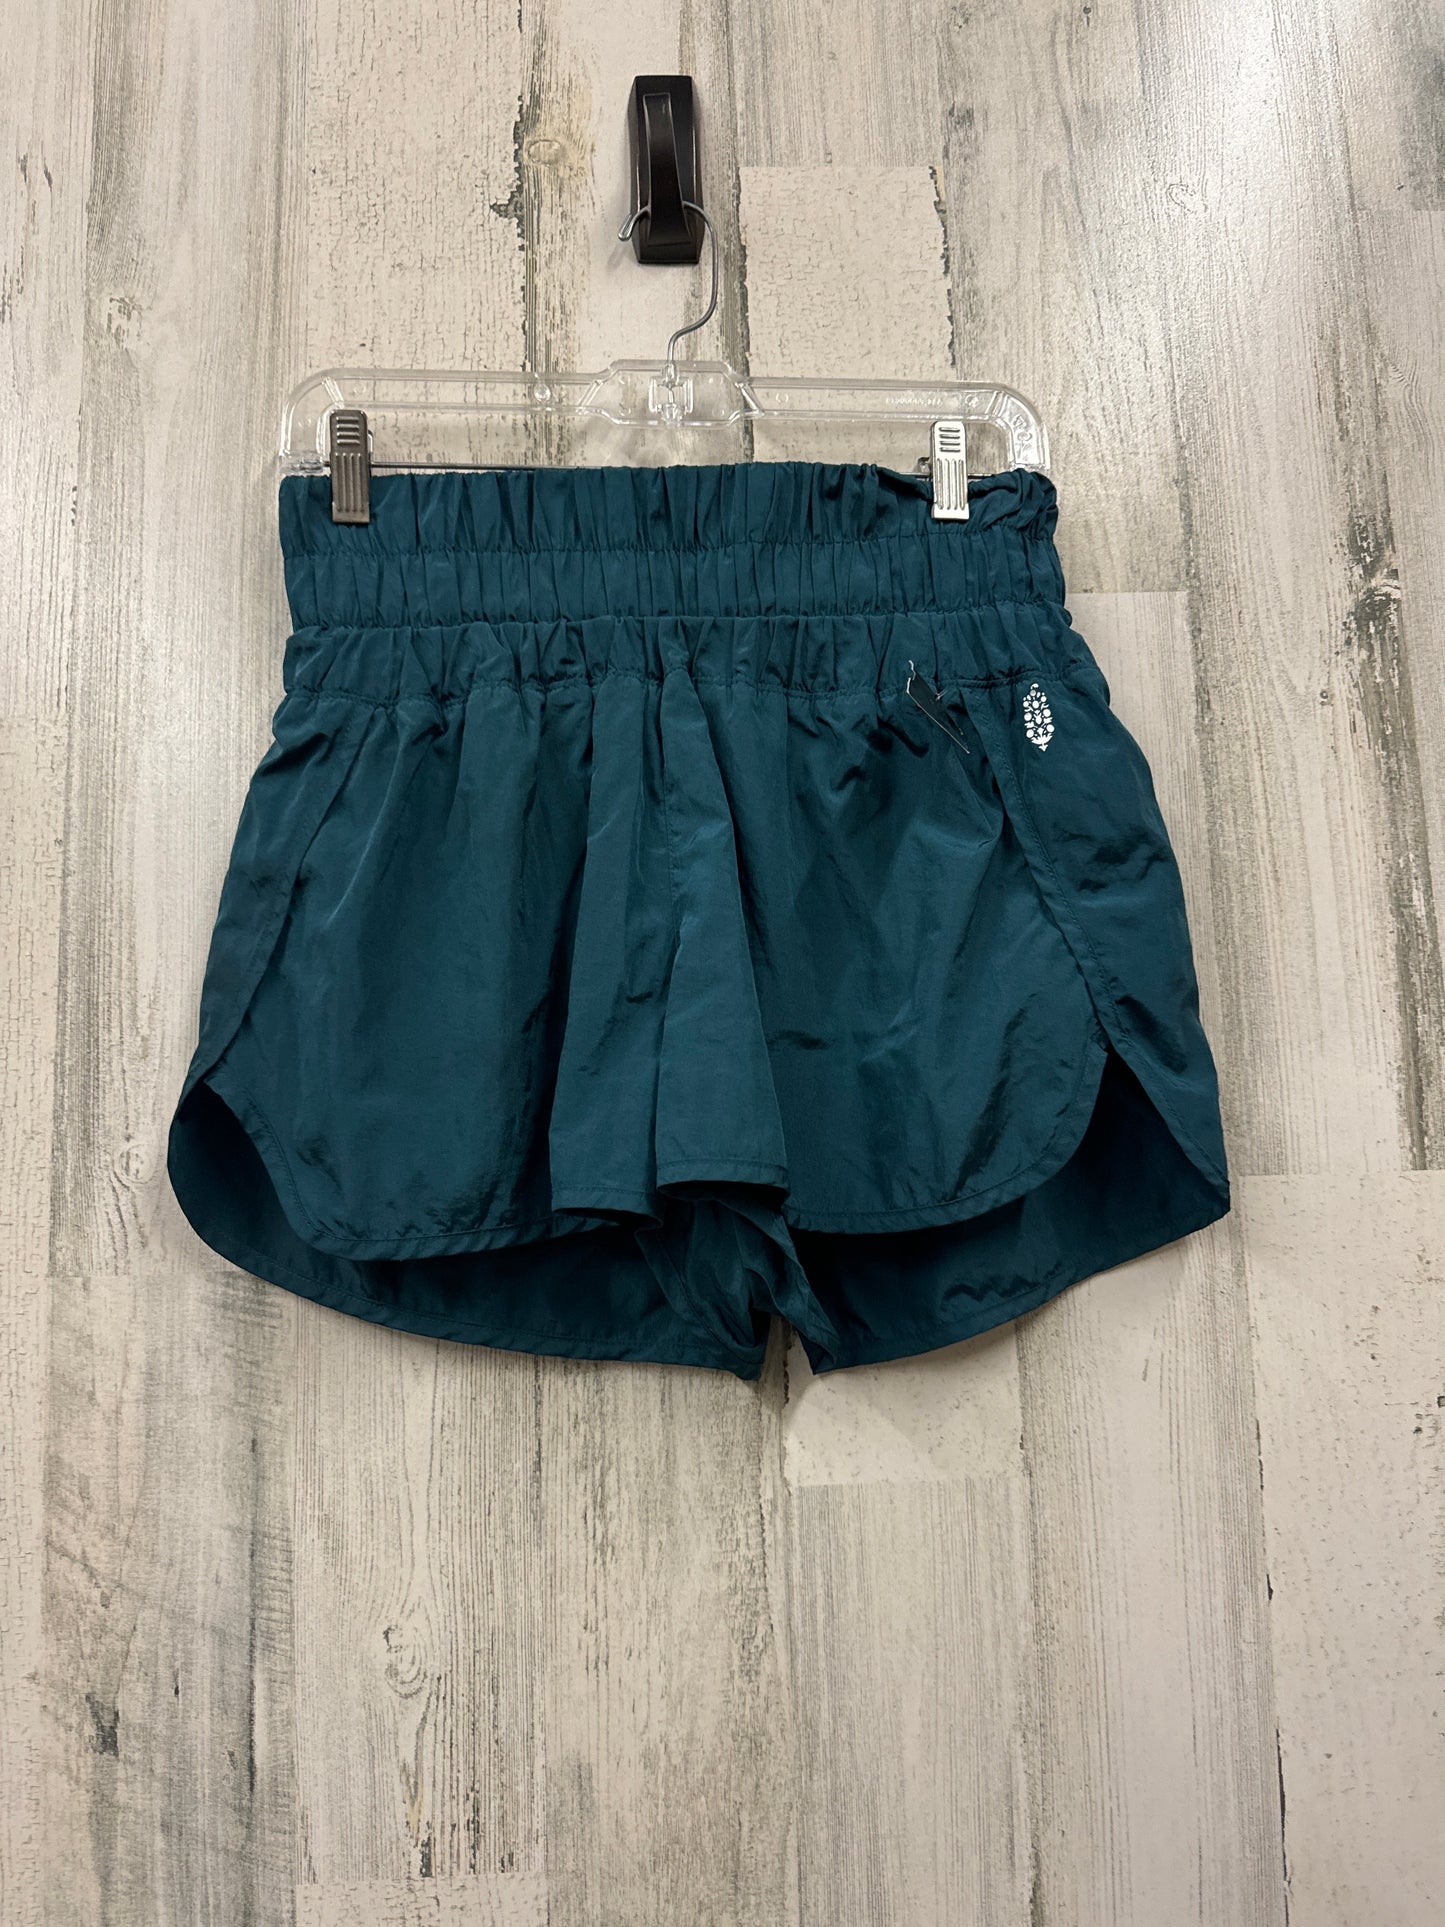 Teal Athletic Shorts Free People, Size M